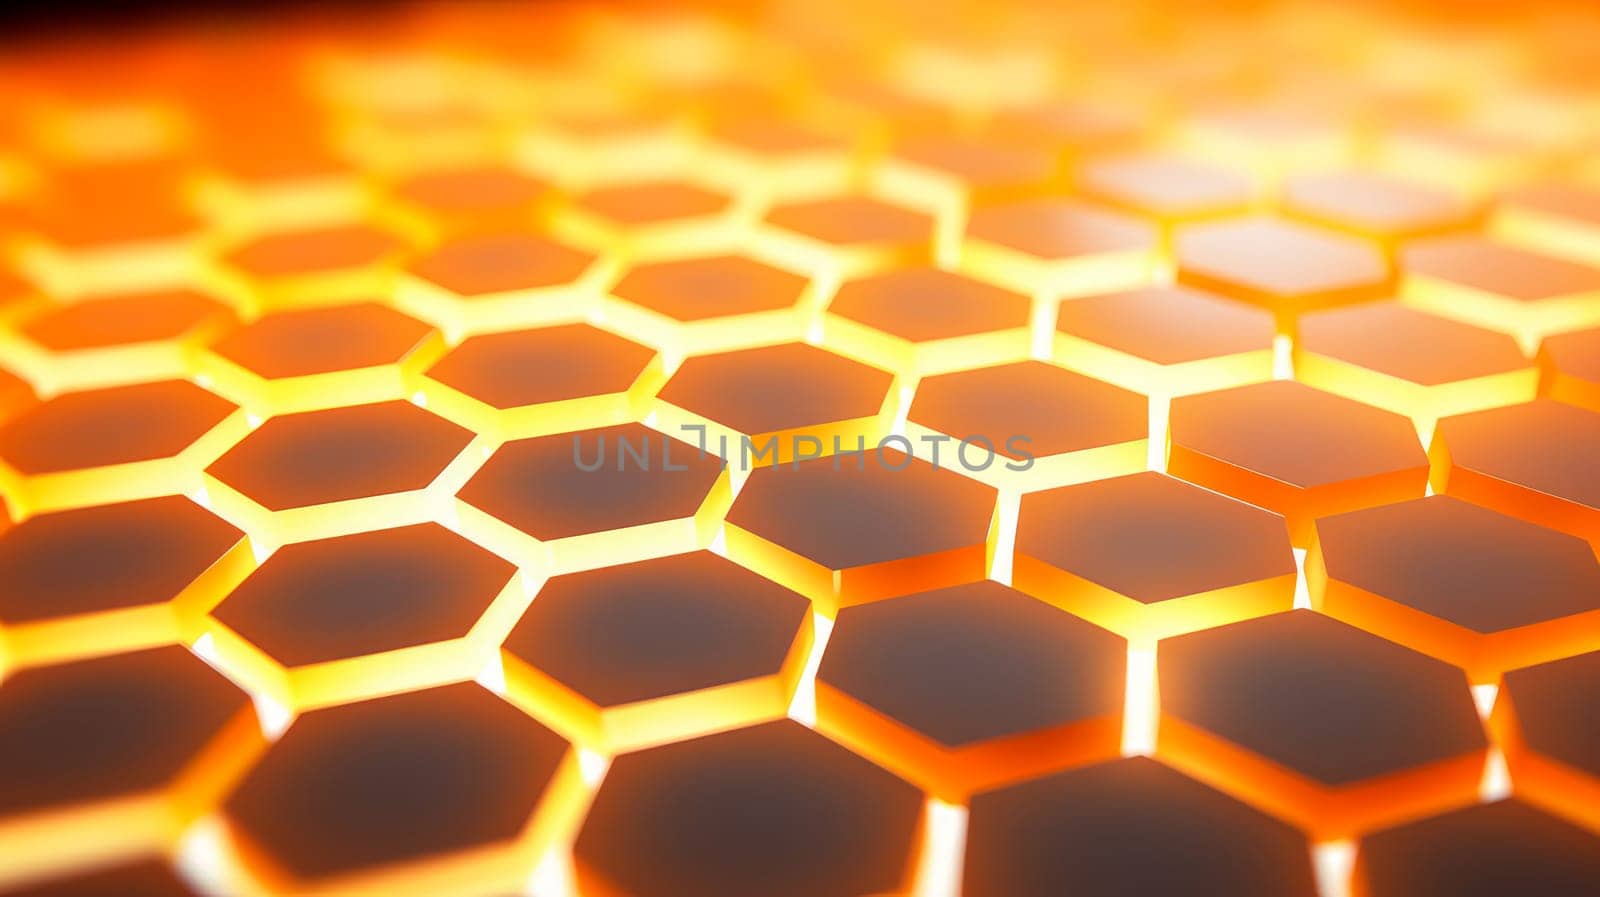 Abstract background with black glowing honeycomb hexagons and fiery orange backlight by Alla_Yurtayeva